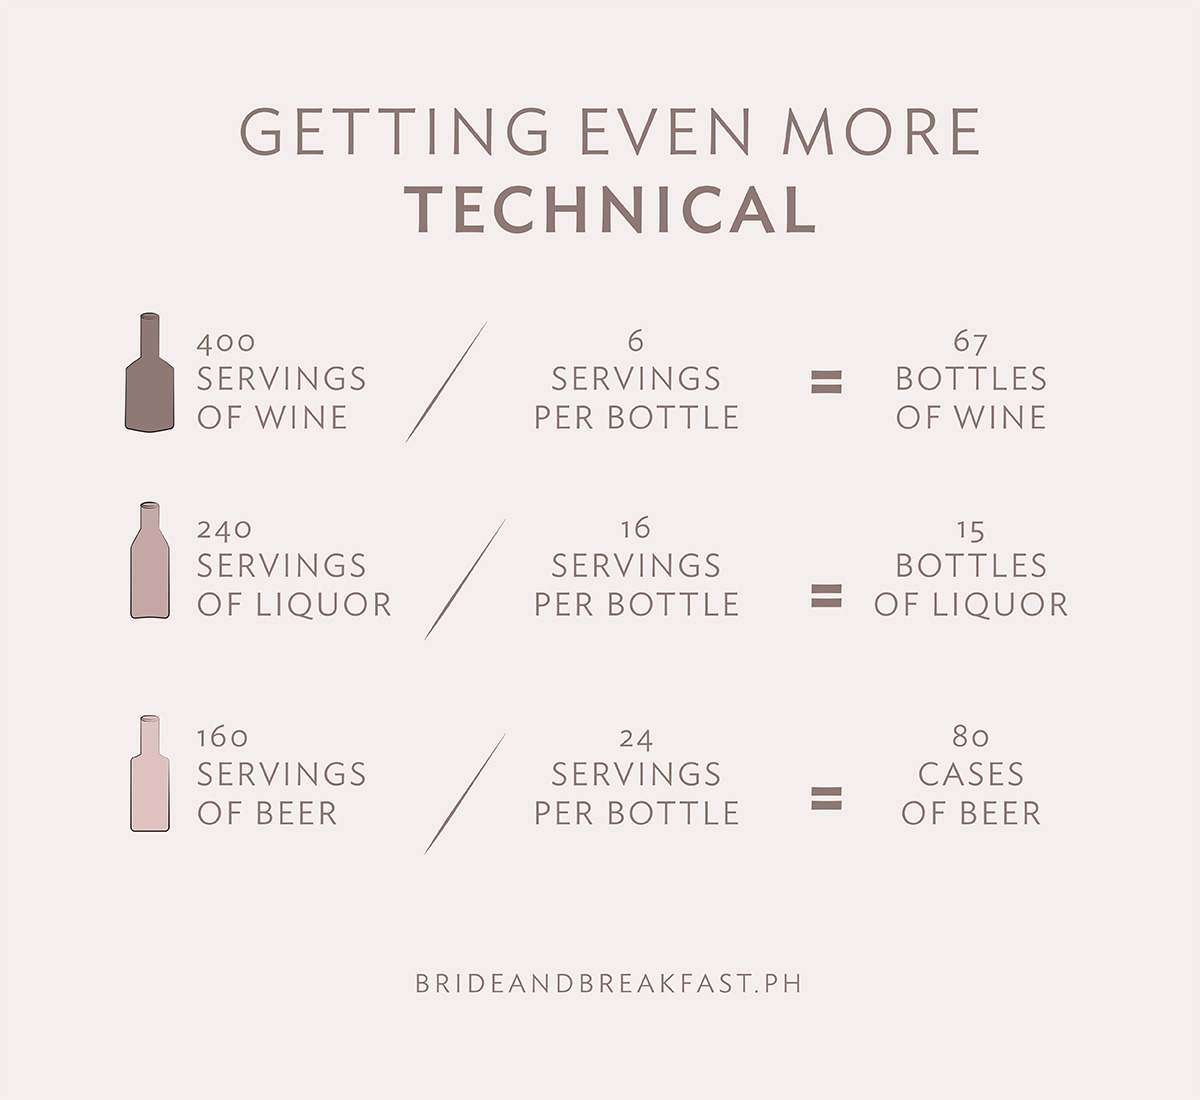 Getting even more technical 400 servings of wine/6 servings per bottle = 67 bottles of wine240 servings of liquor/16 servings per bottle = 15 bottles of liquor160 servings of beer/24 bottles per case = 80 cases of beer